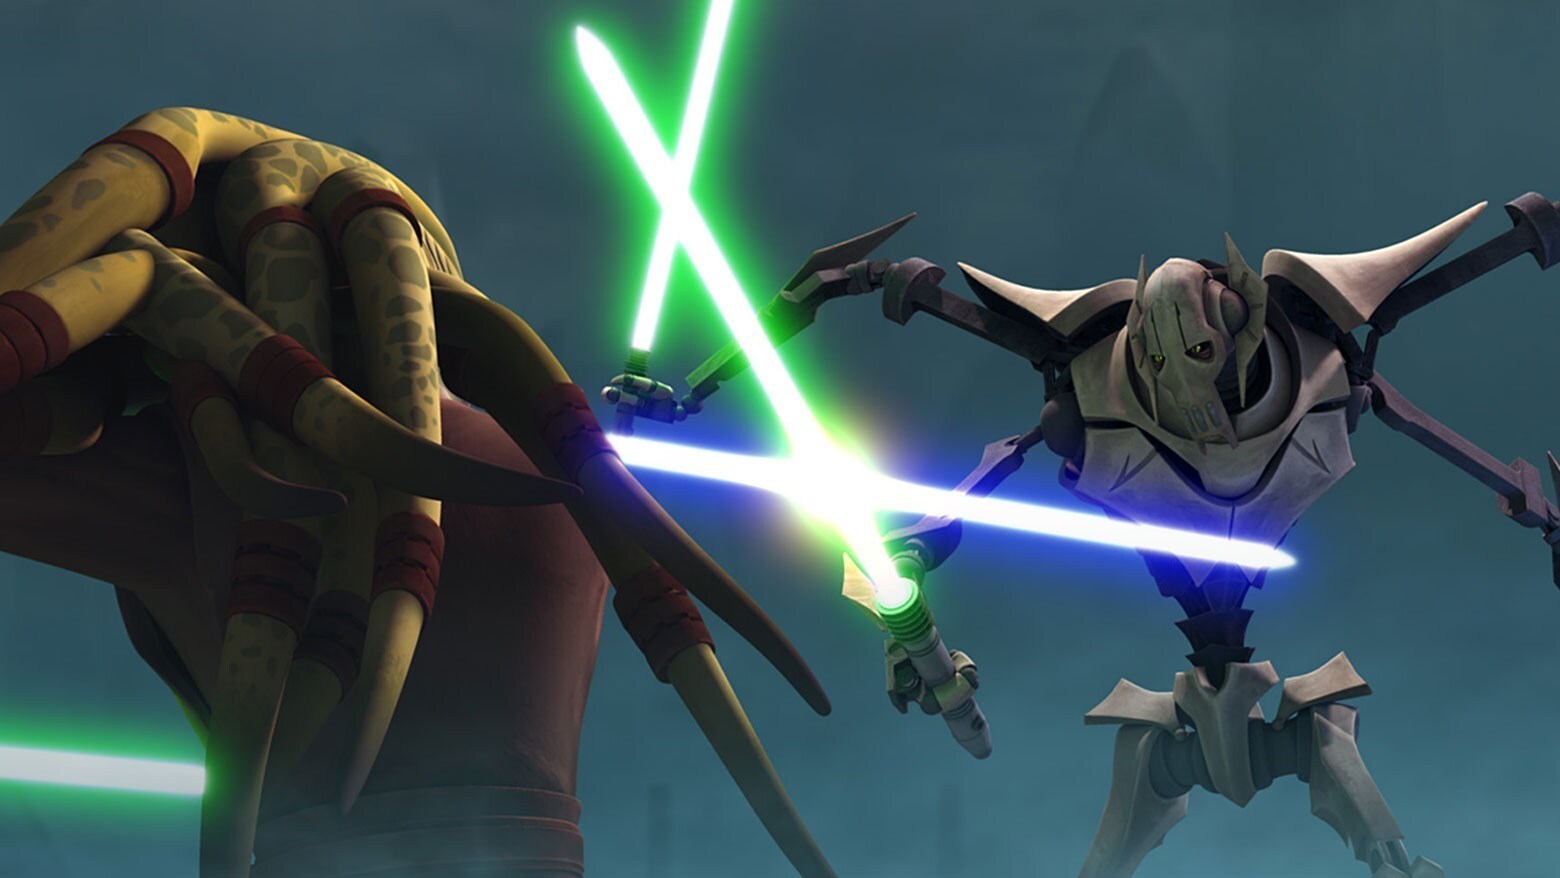 “Lair of Grievous” | Star Wars The Clone Wars